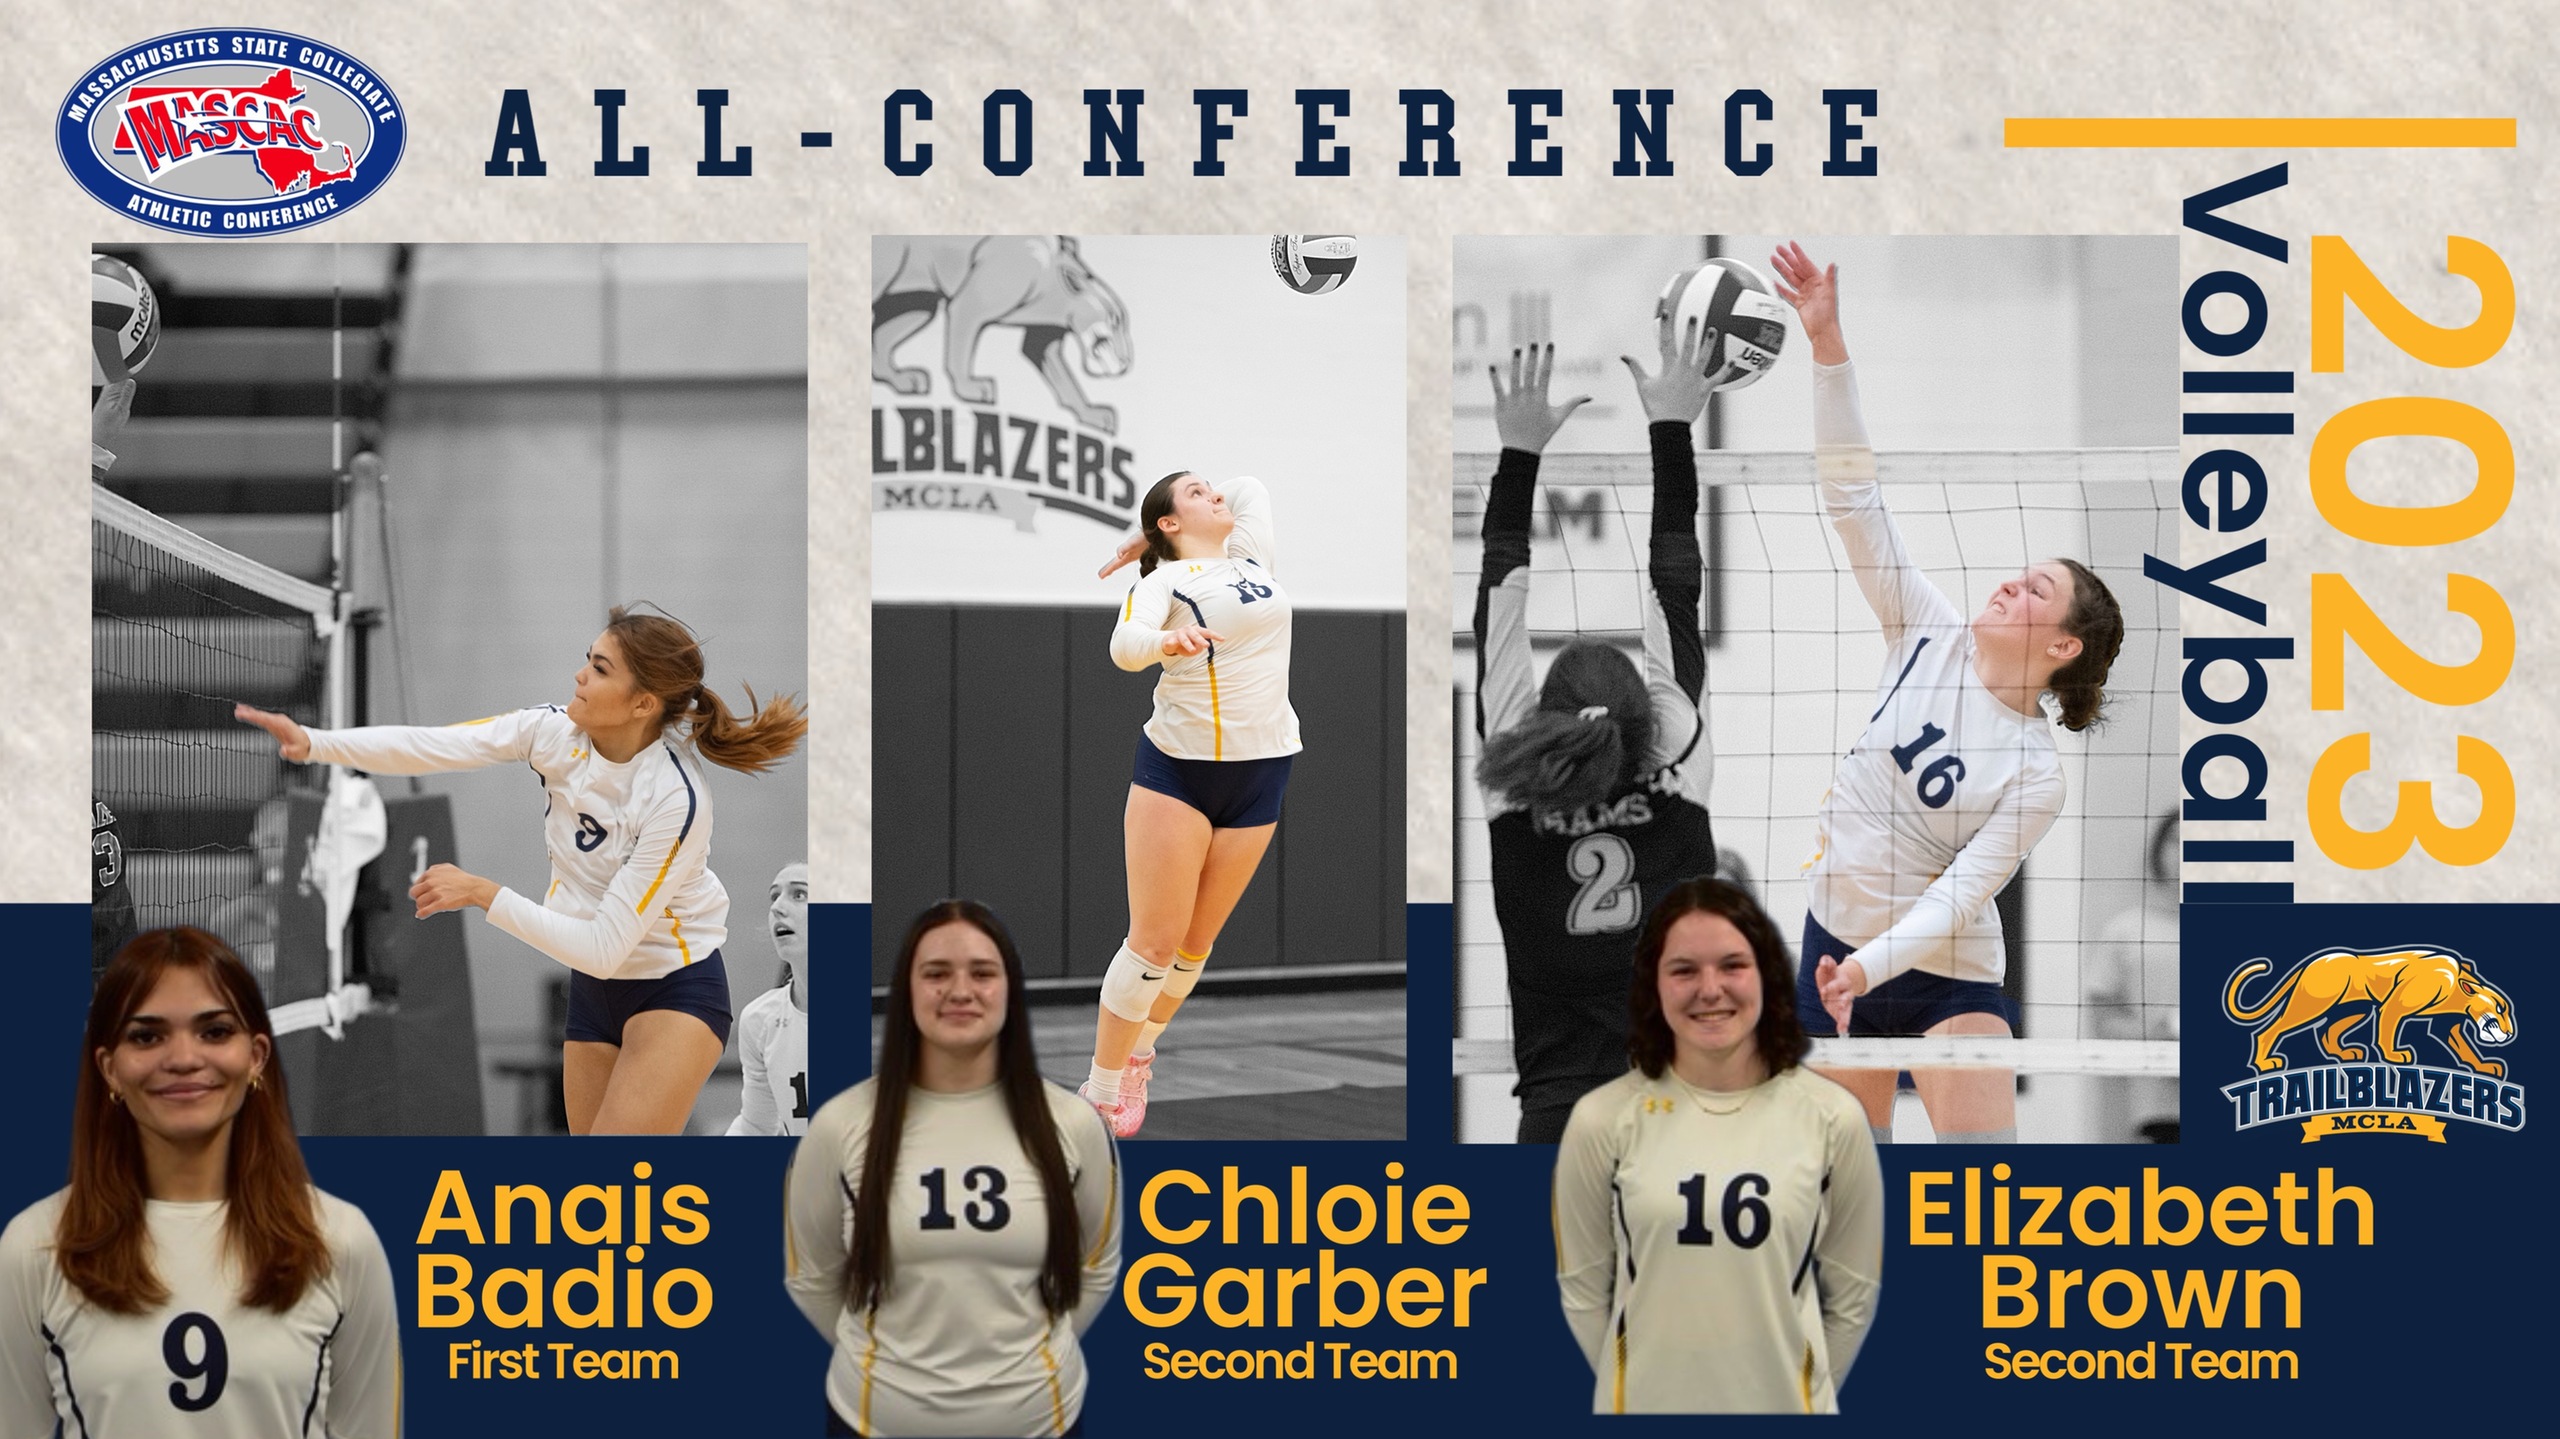 Anais Badio, Chloie Garber, and Elizabeth Brown were named to the MASCAC All-Conference Teams